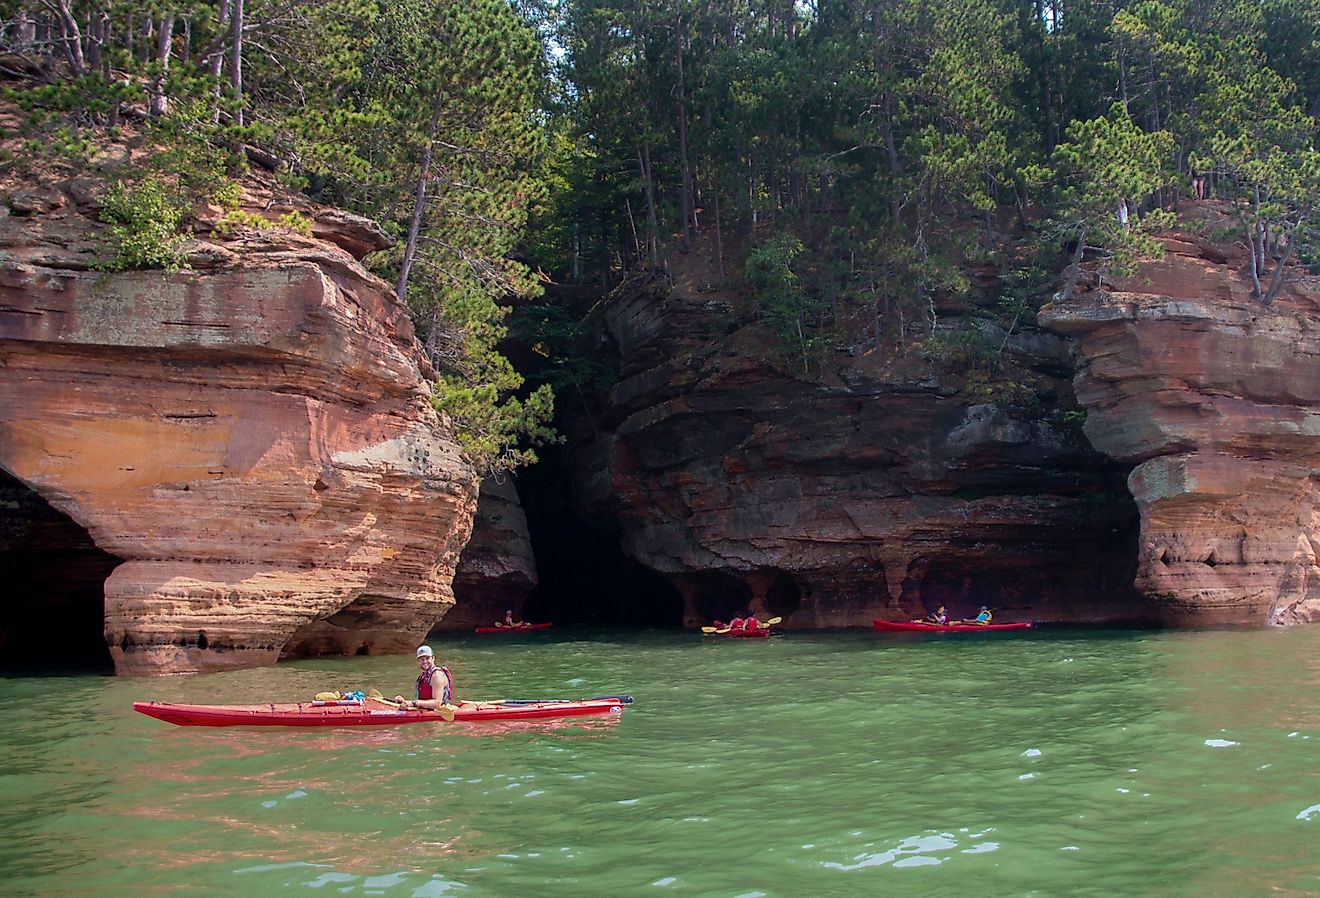 Kayakers enjoy the Apostle Island National Sea Caves in Bayfield, Wisconsin. Image credit Jacob Boomsma via Shutterstock.